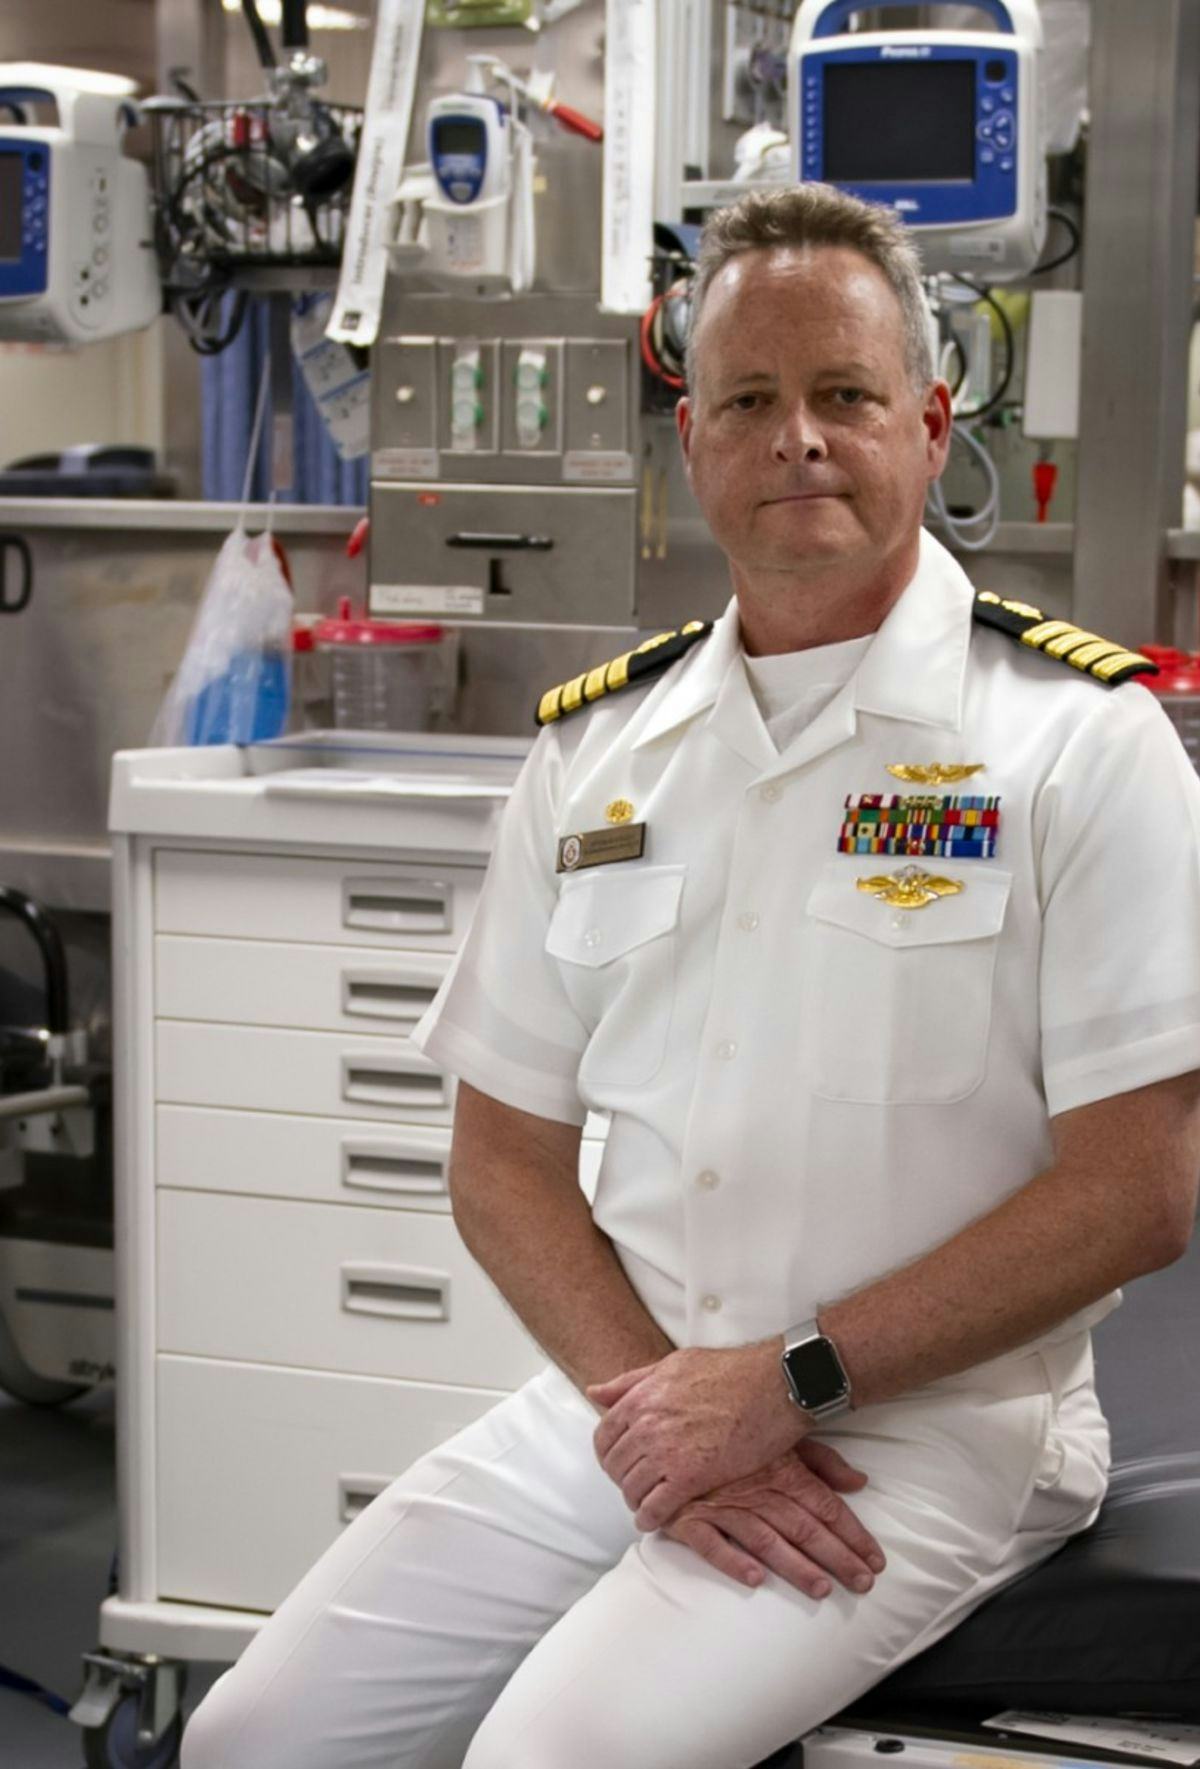 Captain Kevin Buckley in hospital ship operating room